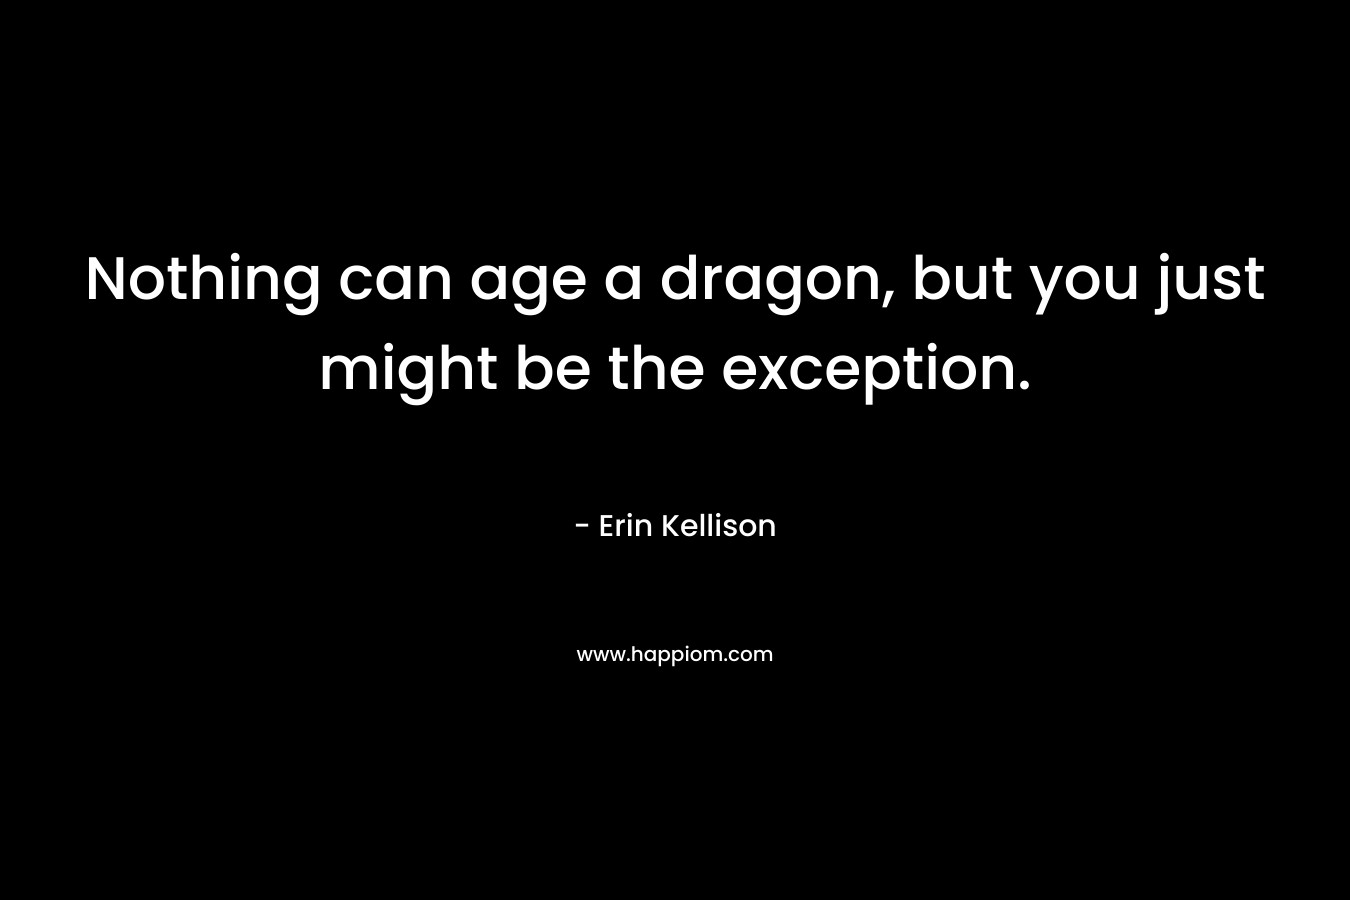 Nothing can age a dragon, but you just might be the exception.